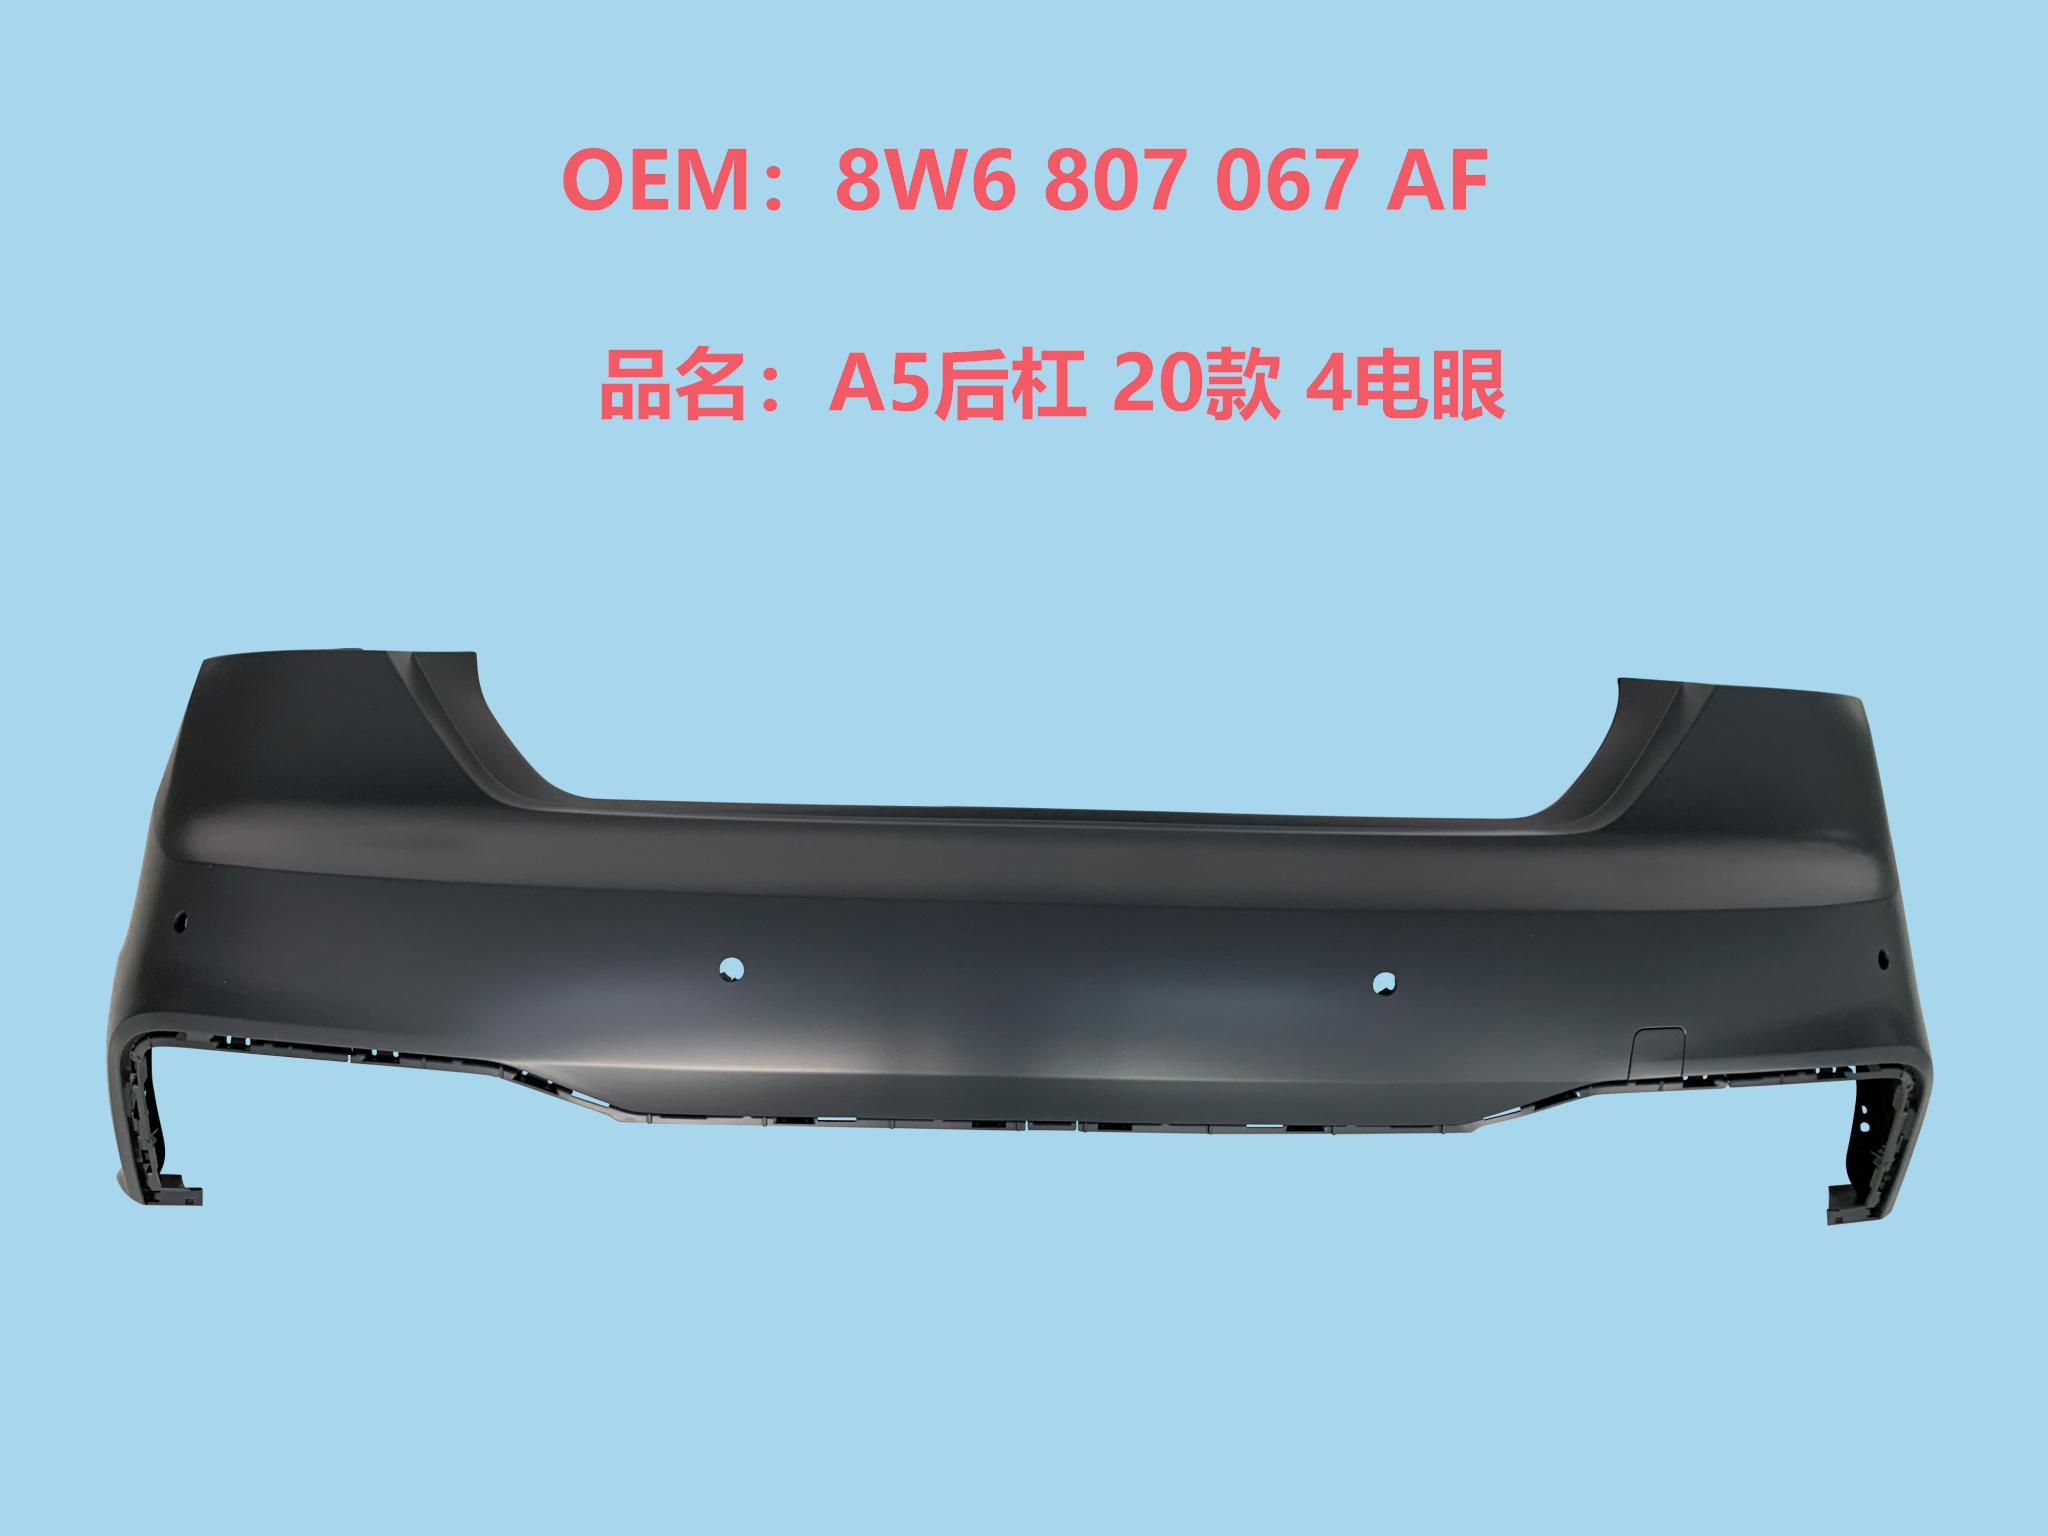 Bumper Cover FIT FOR A5 2020,8W6 807 067 AF  